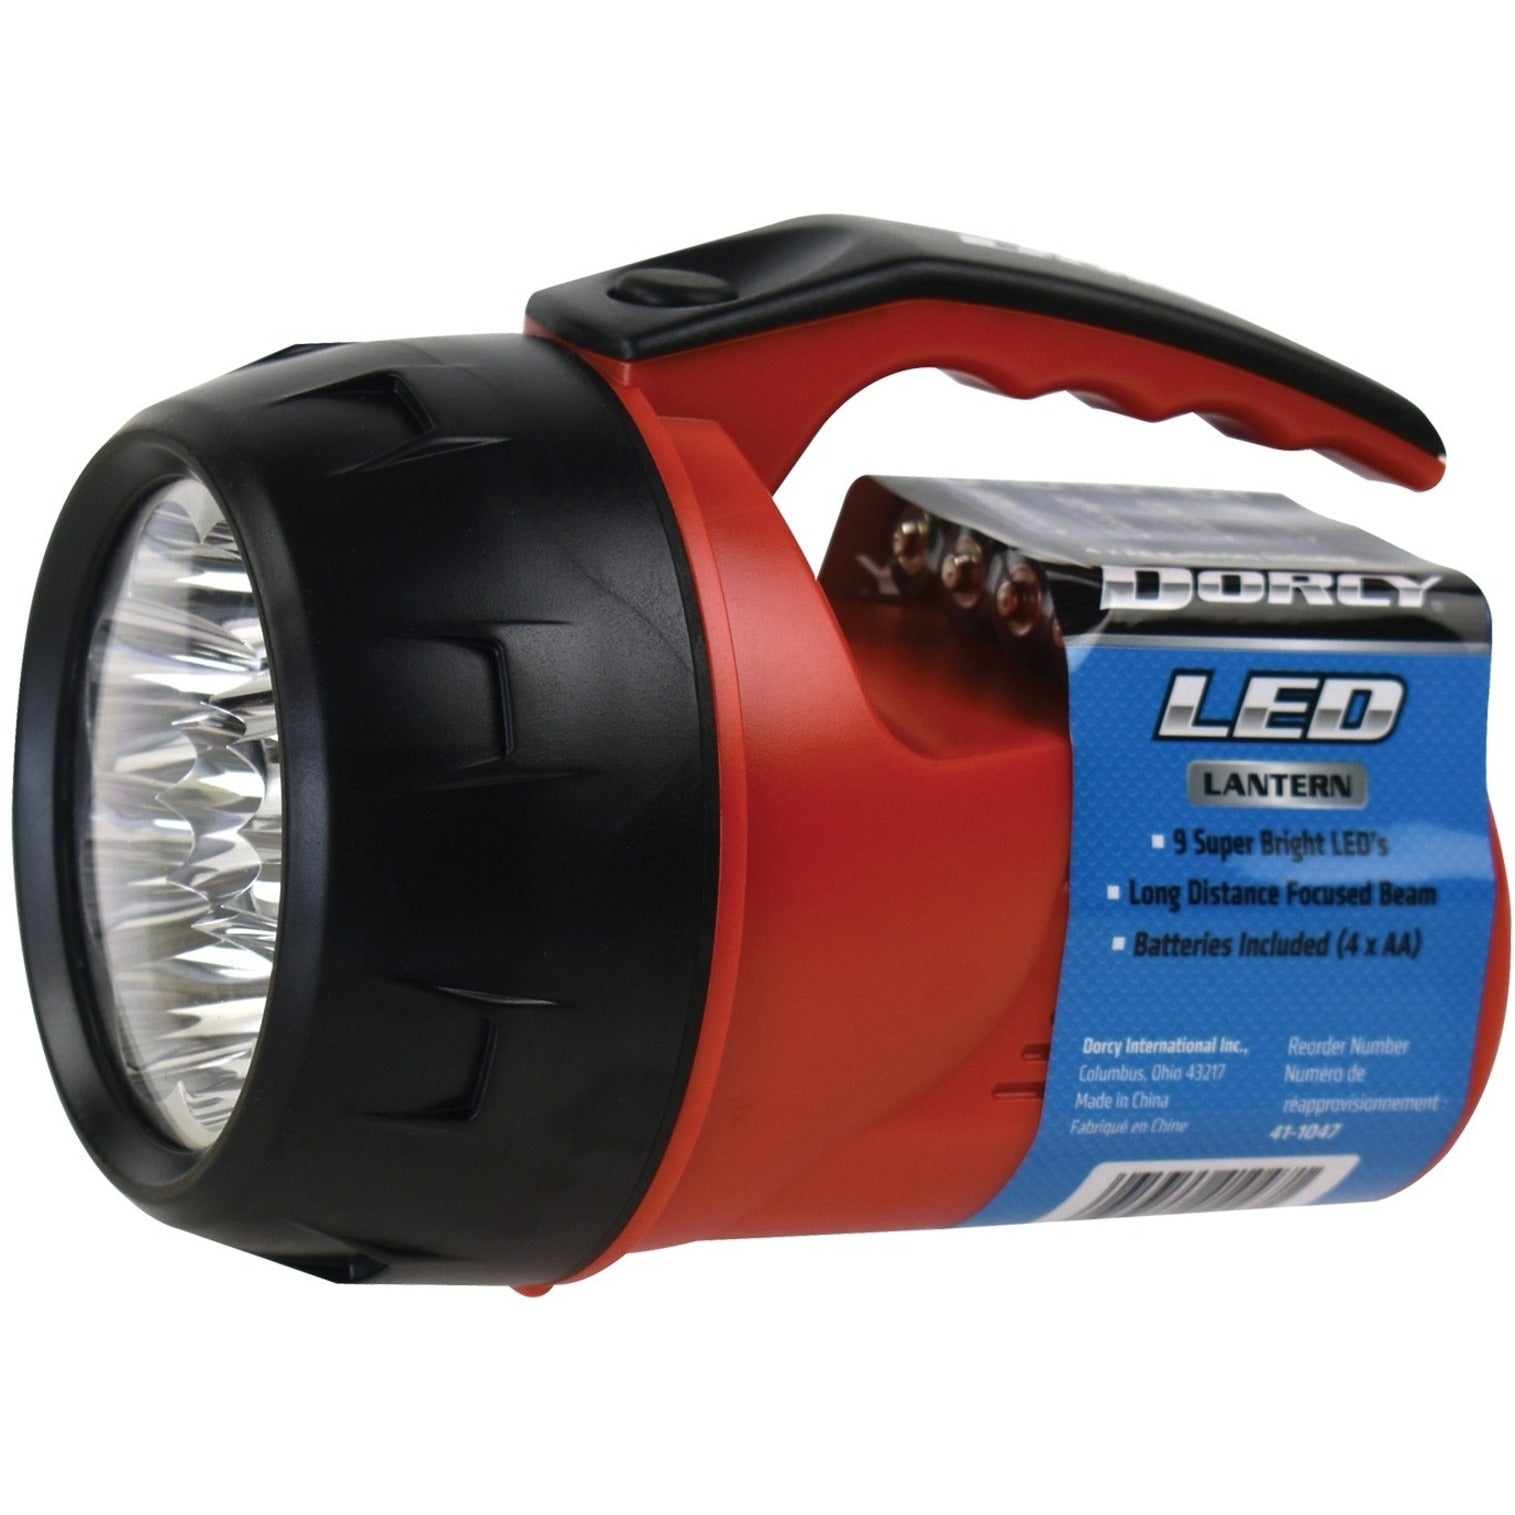 Dorcy 411047 4AA 9 LED Lantern, Compact Handle, Super Bright, 12 Hour Battery Life